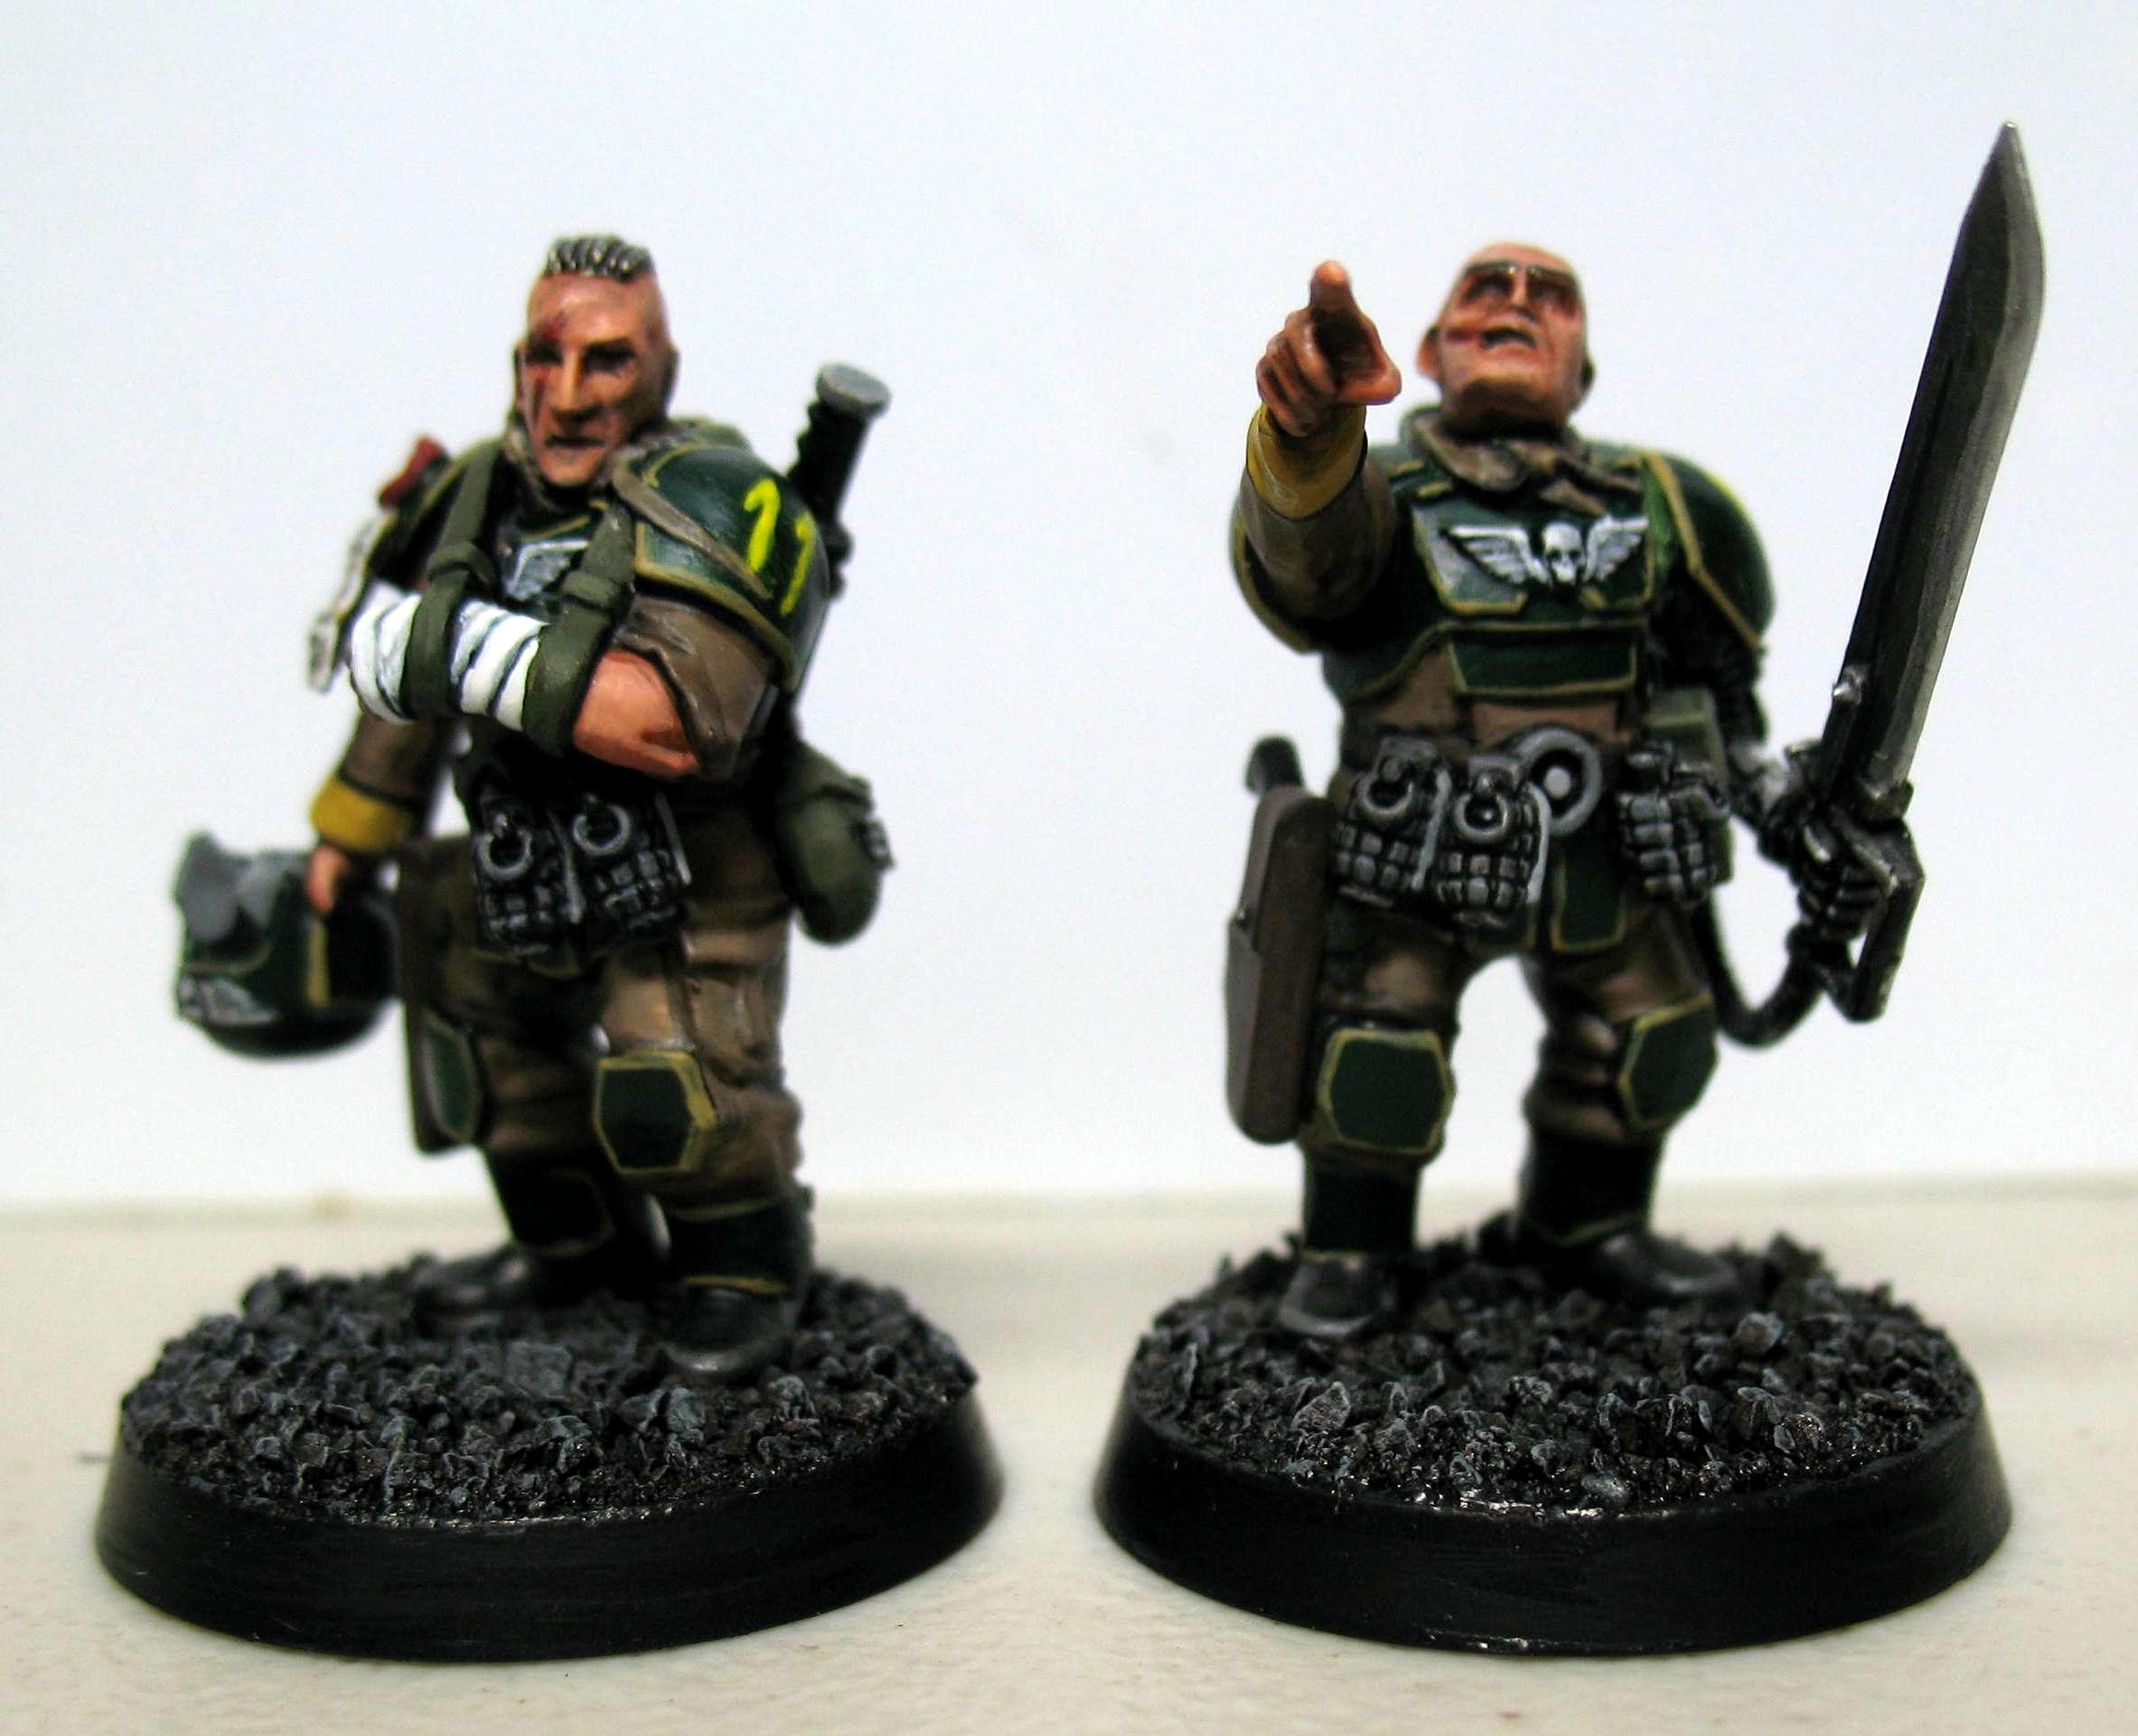 Bodyguard, Bodyguards, Cadians, Imperial Guard, Kitbash, Painted, Warhammer 40,000